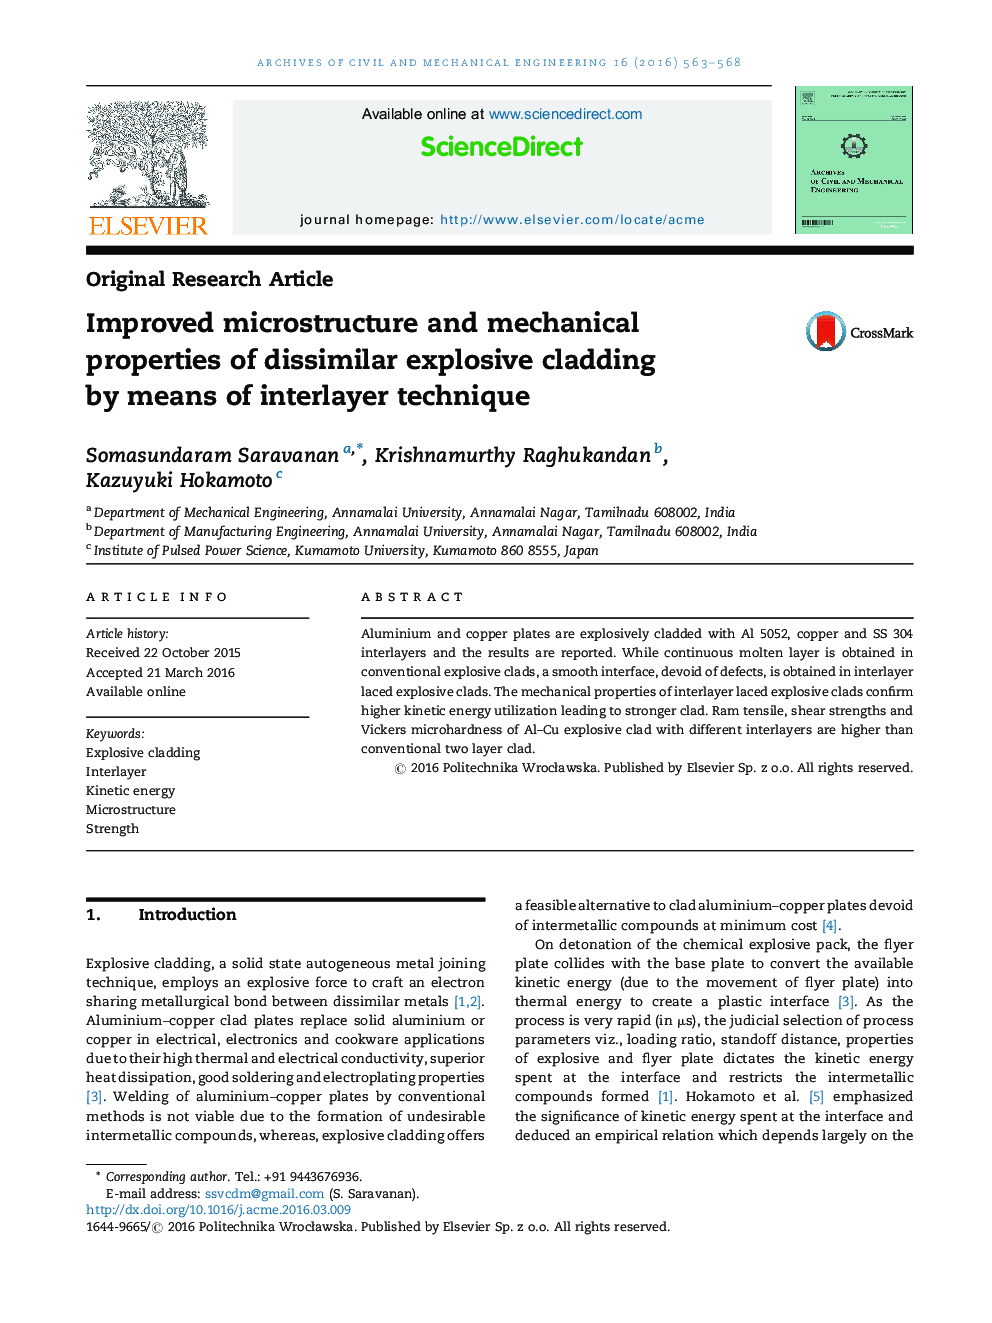 Improved microstructure and mechanical properties of dissimilar explosive cladding by means of interlayer technique